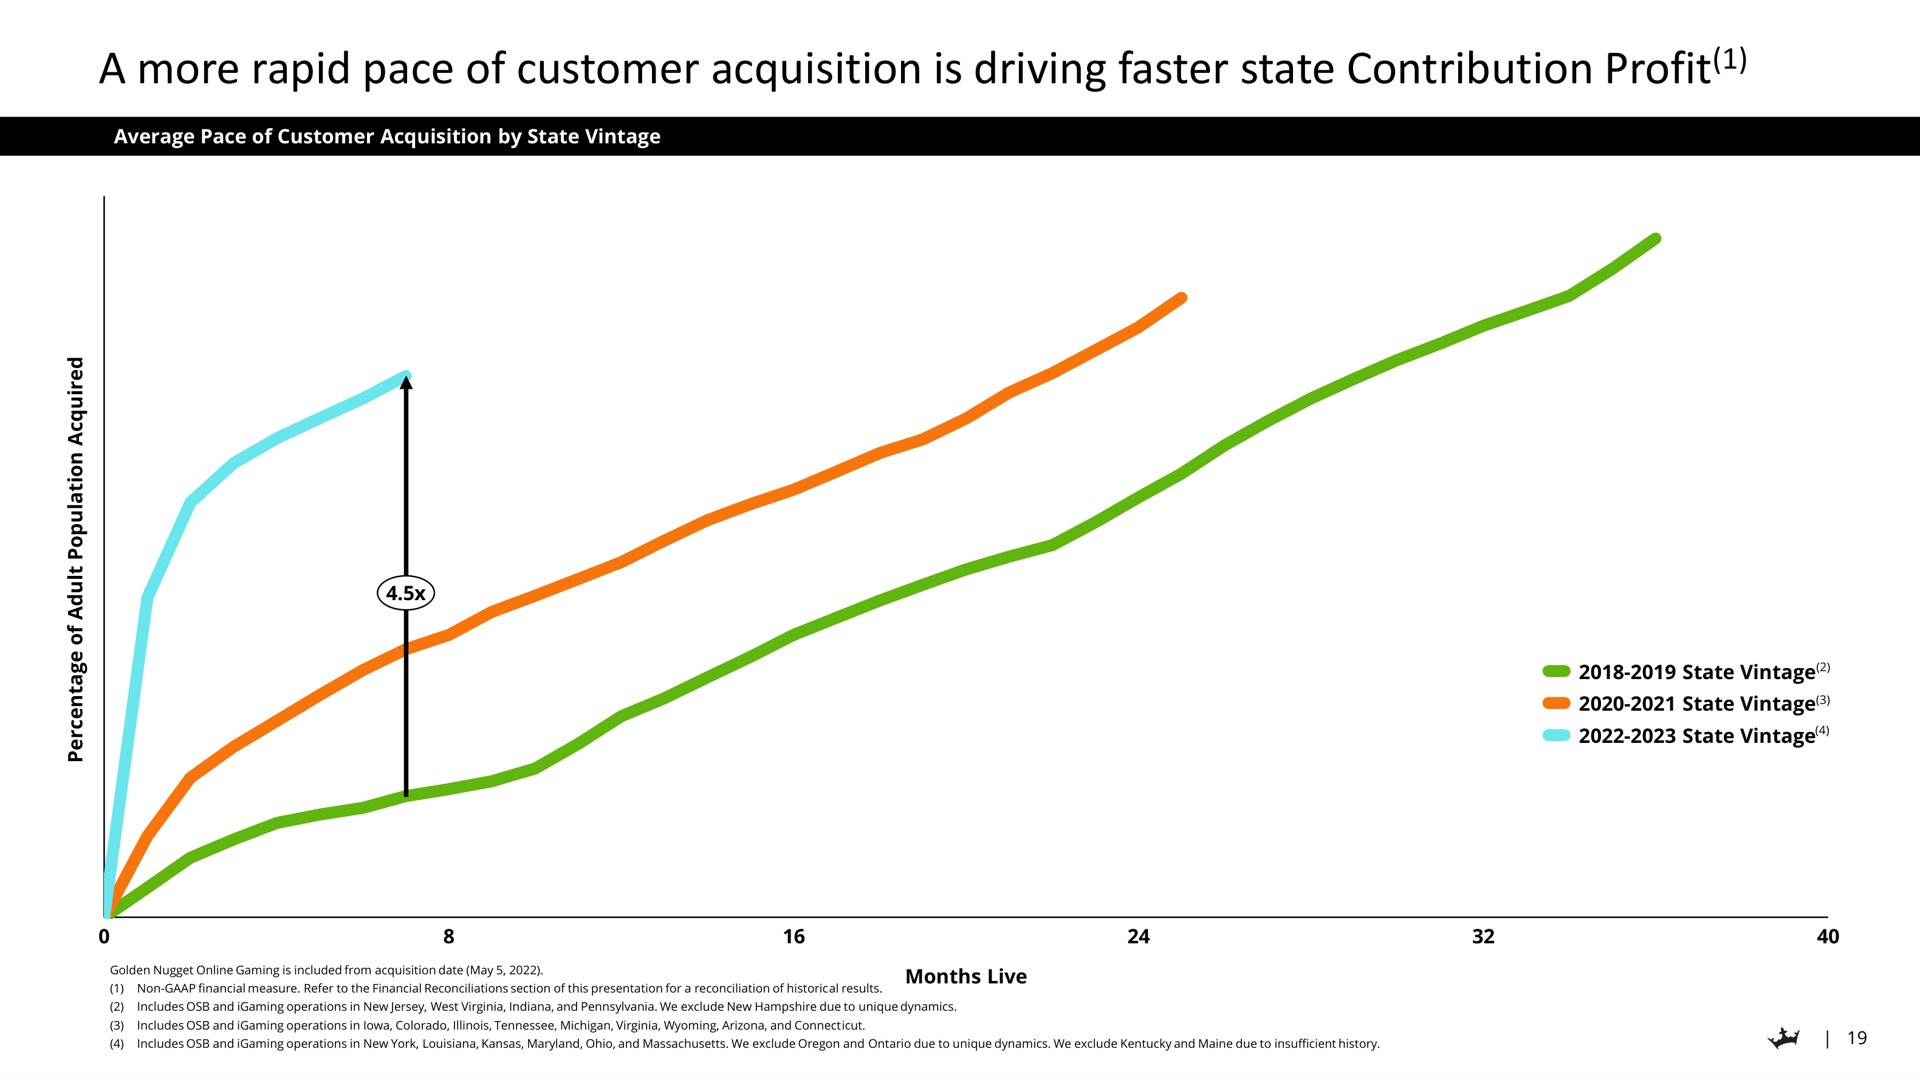 a more rapid pace of customer acquisition is driving faster state contribution profit | DraftKings